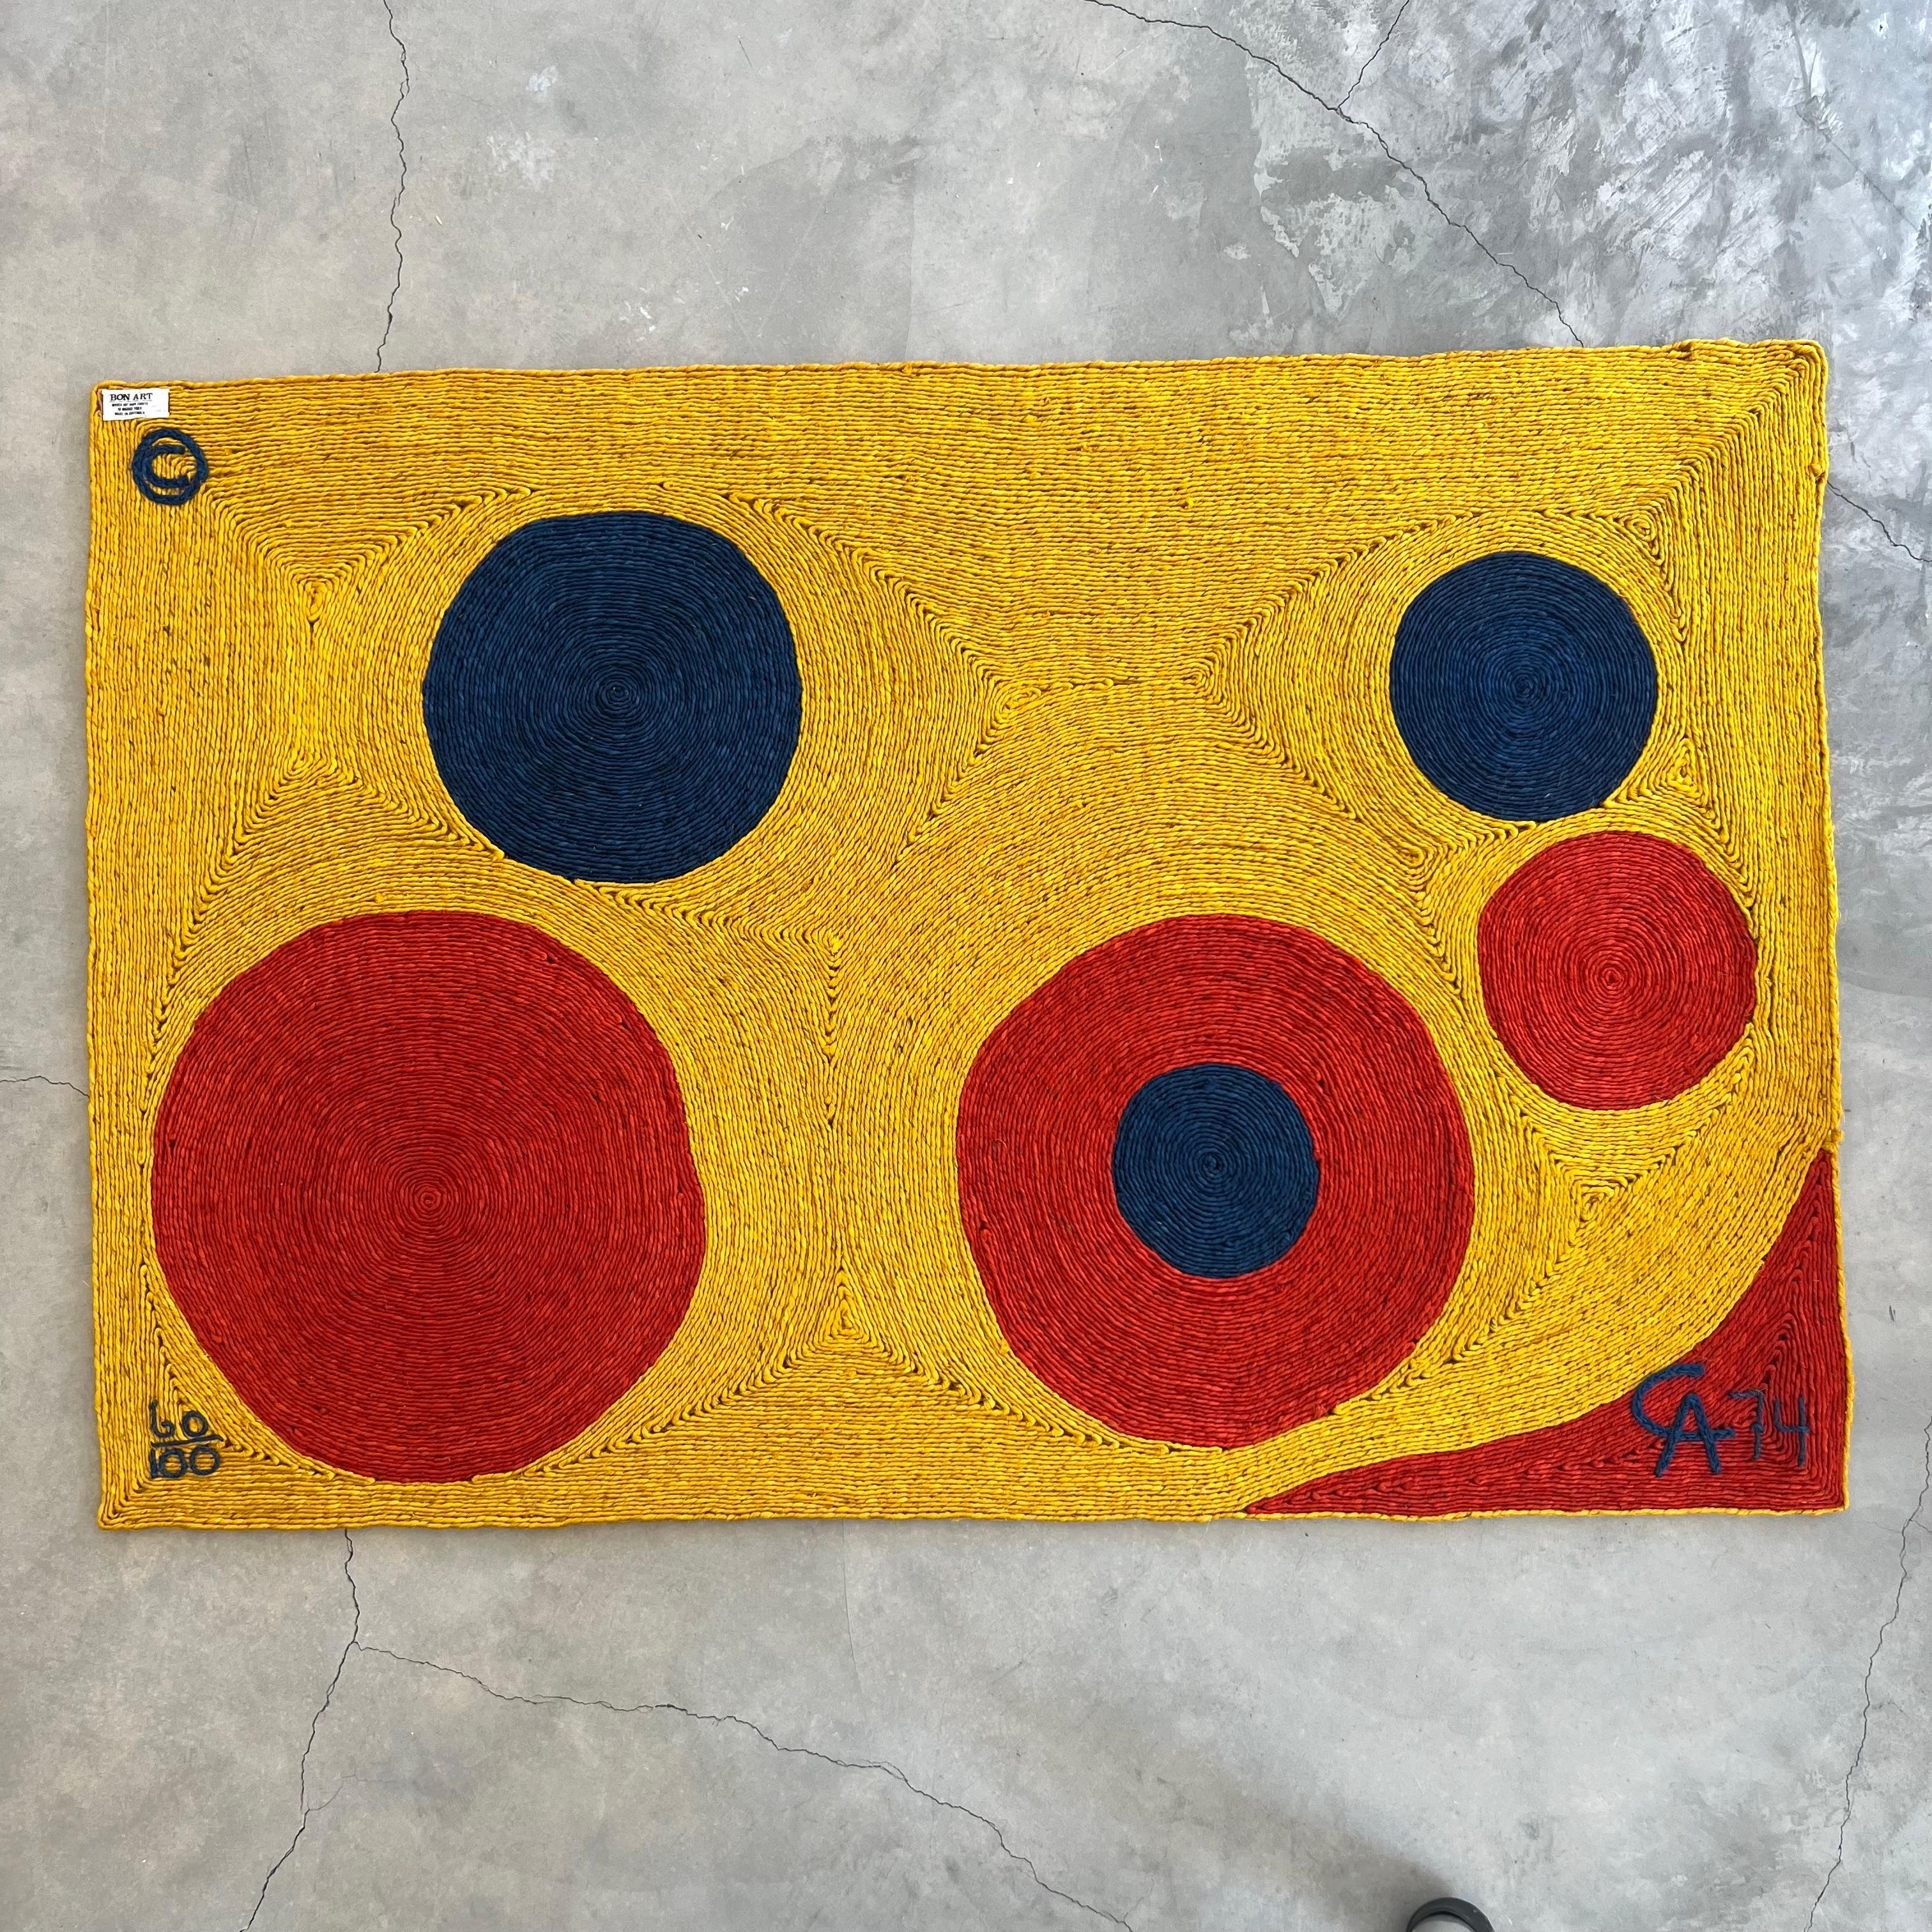 Extremely rare Alexander Calder jute tapestry. This is the 'Sun' design tapestry. Made in Guatemala, in 1974. Bon Art fabric label to upper left reads 